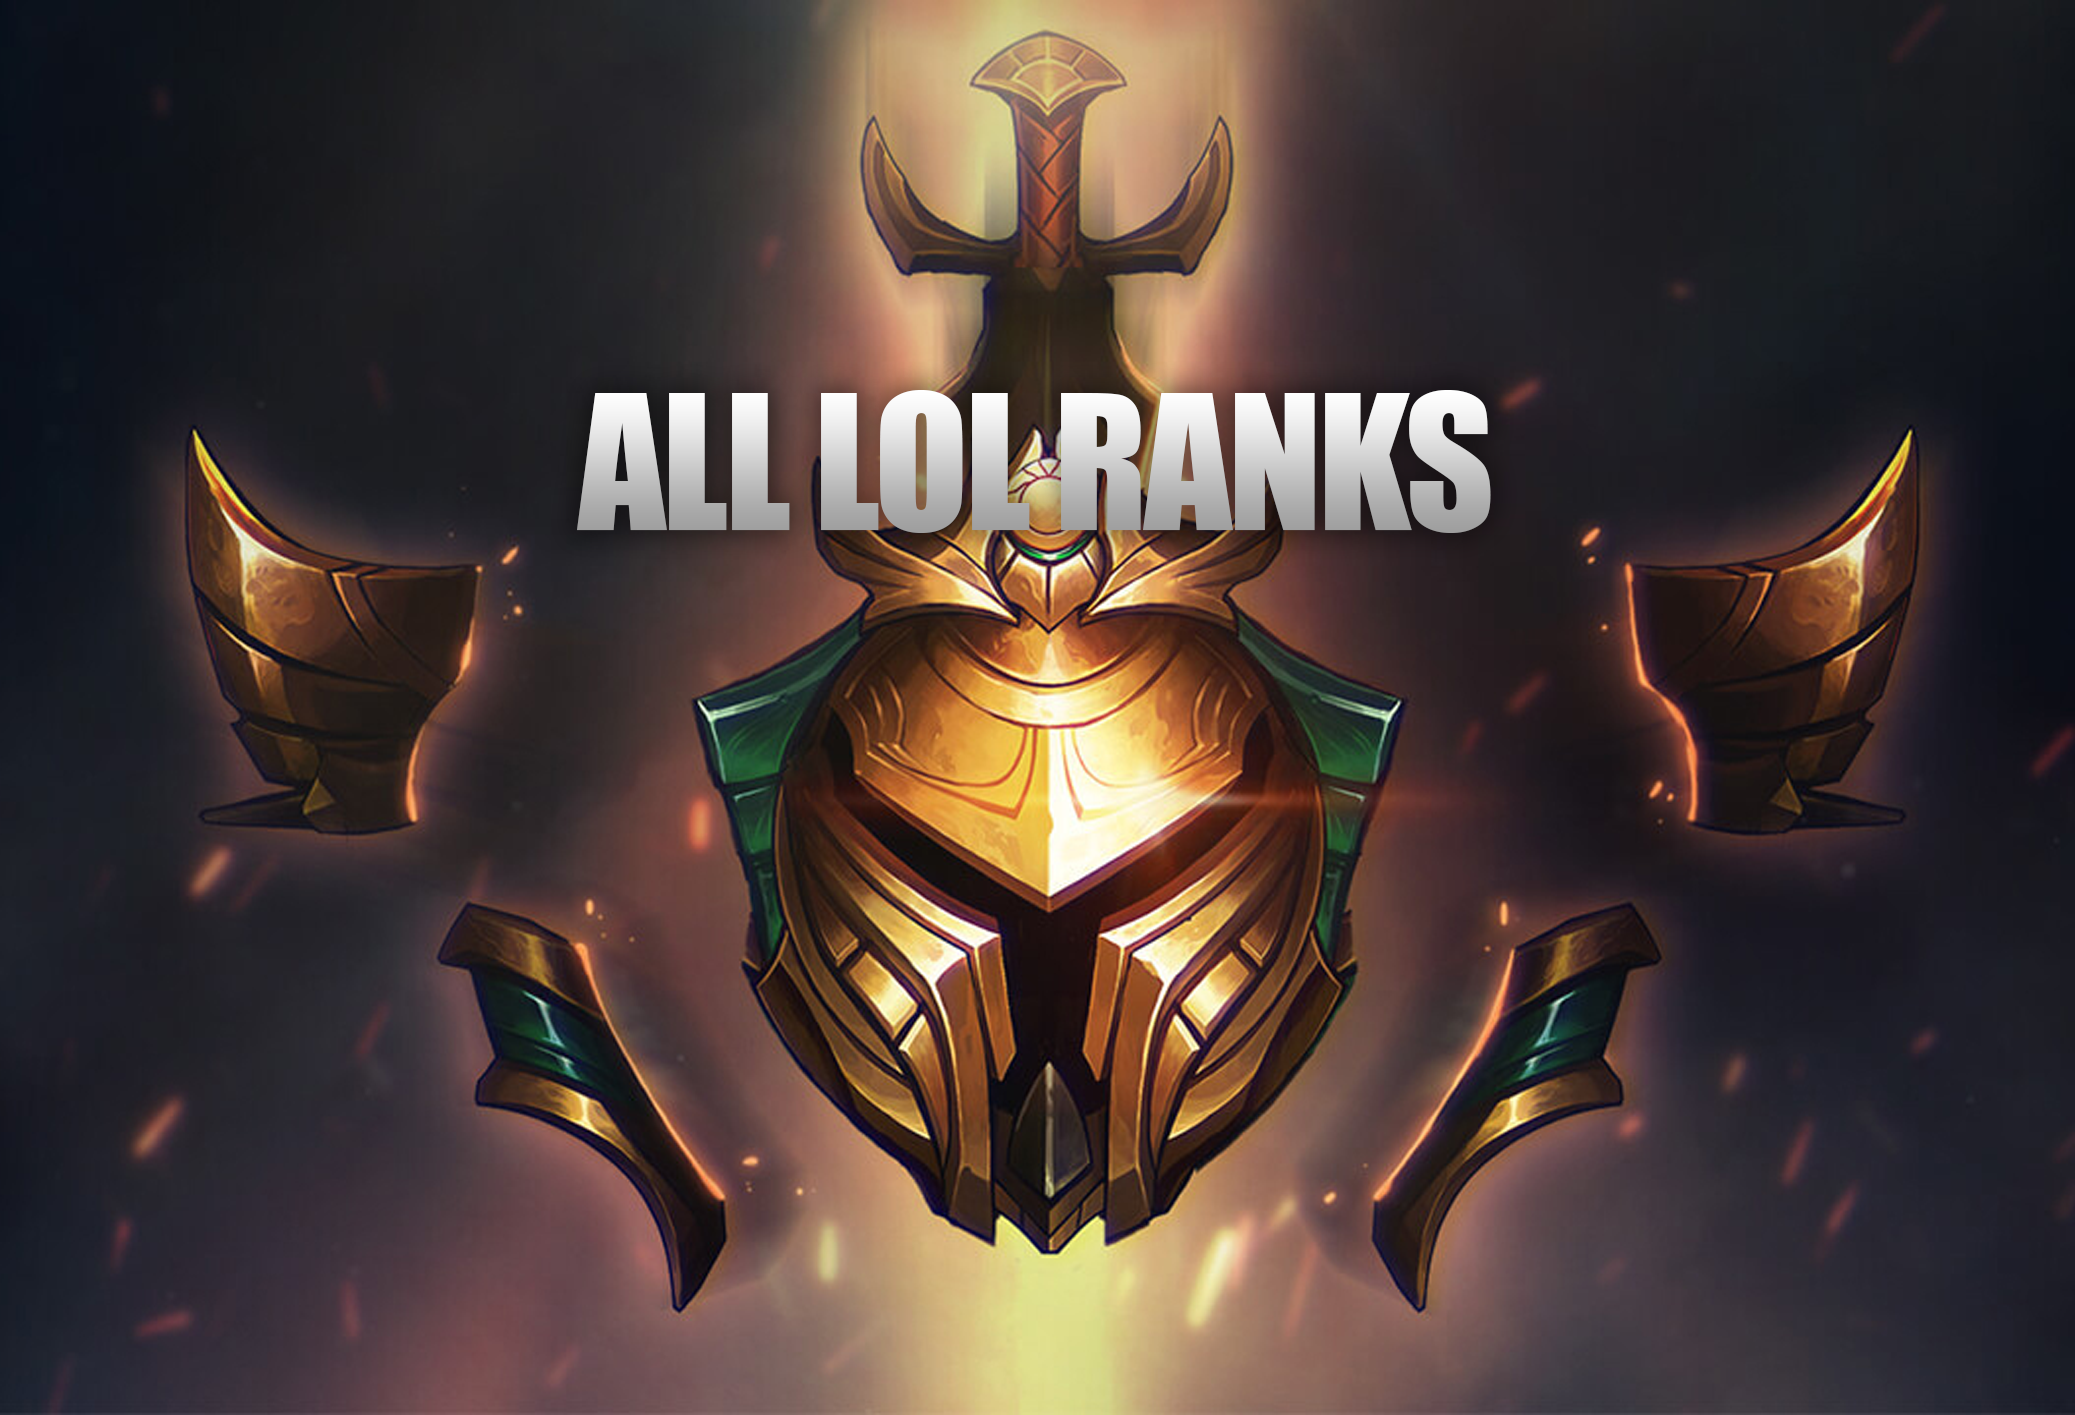 League of Legends ranks are a tiered system with divisions within each tier. Each tier except Master, Grandmaster, and Challenger contains four divisions.